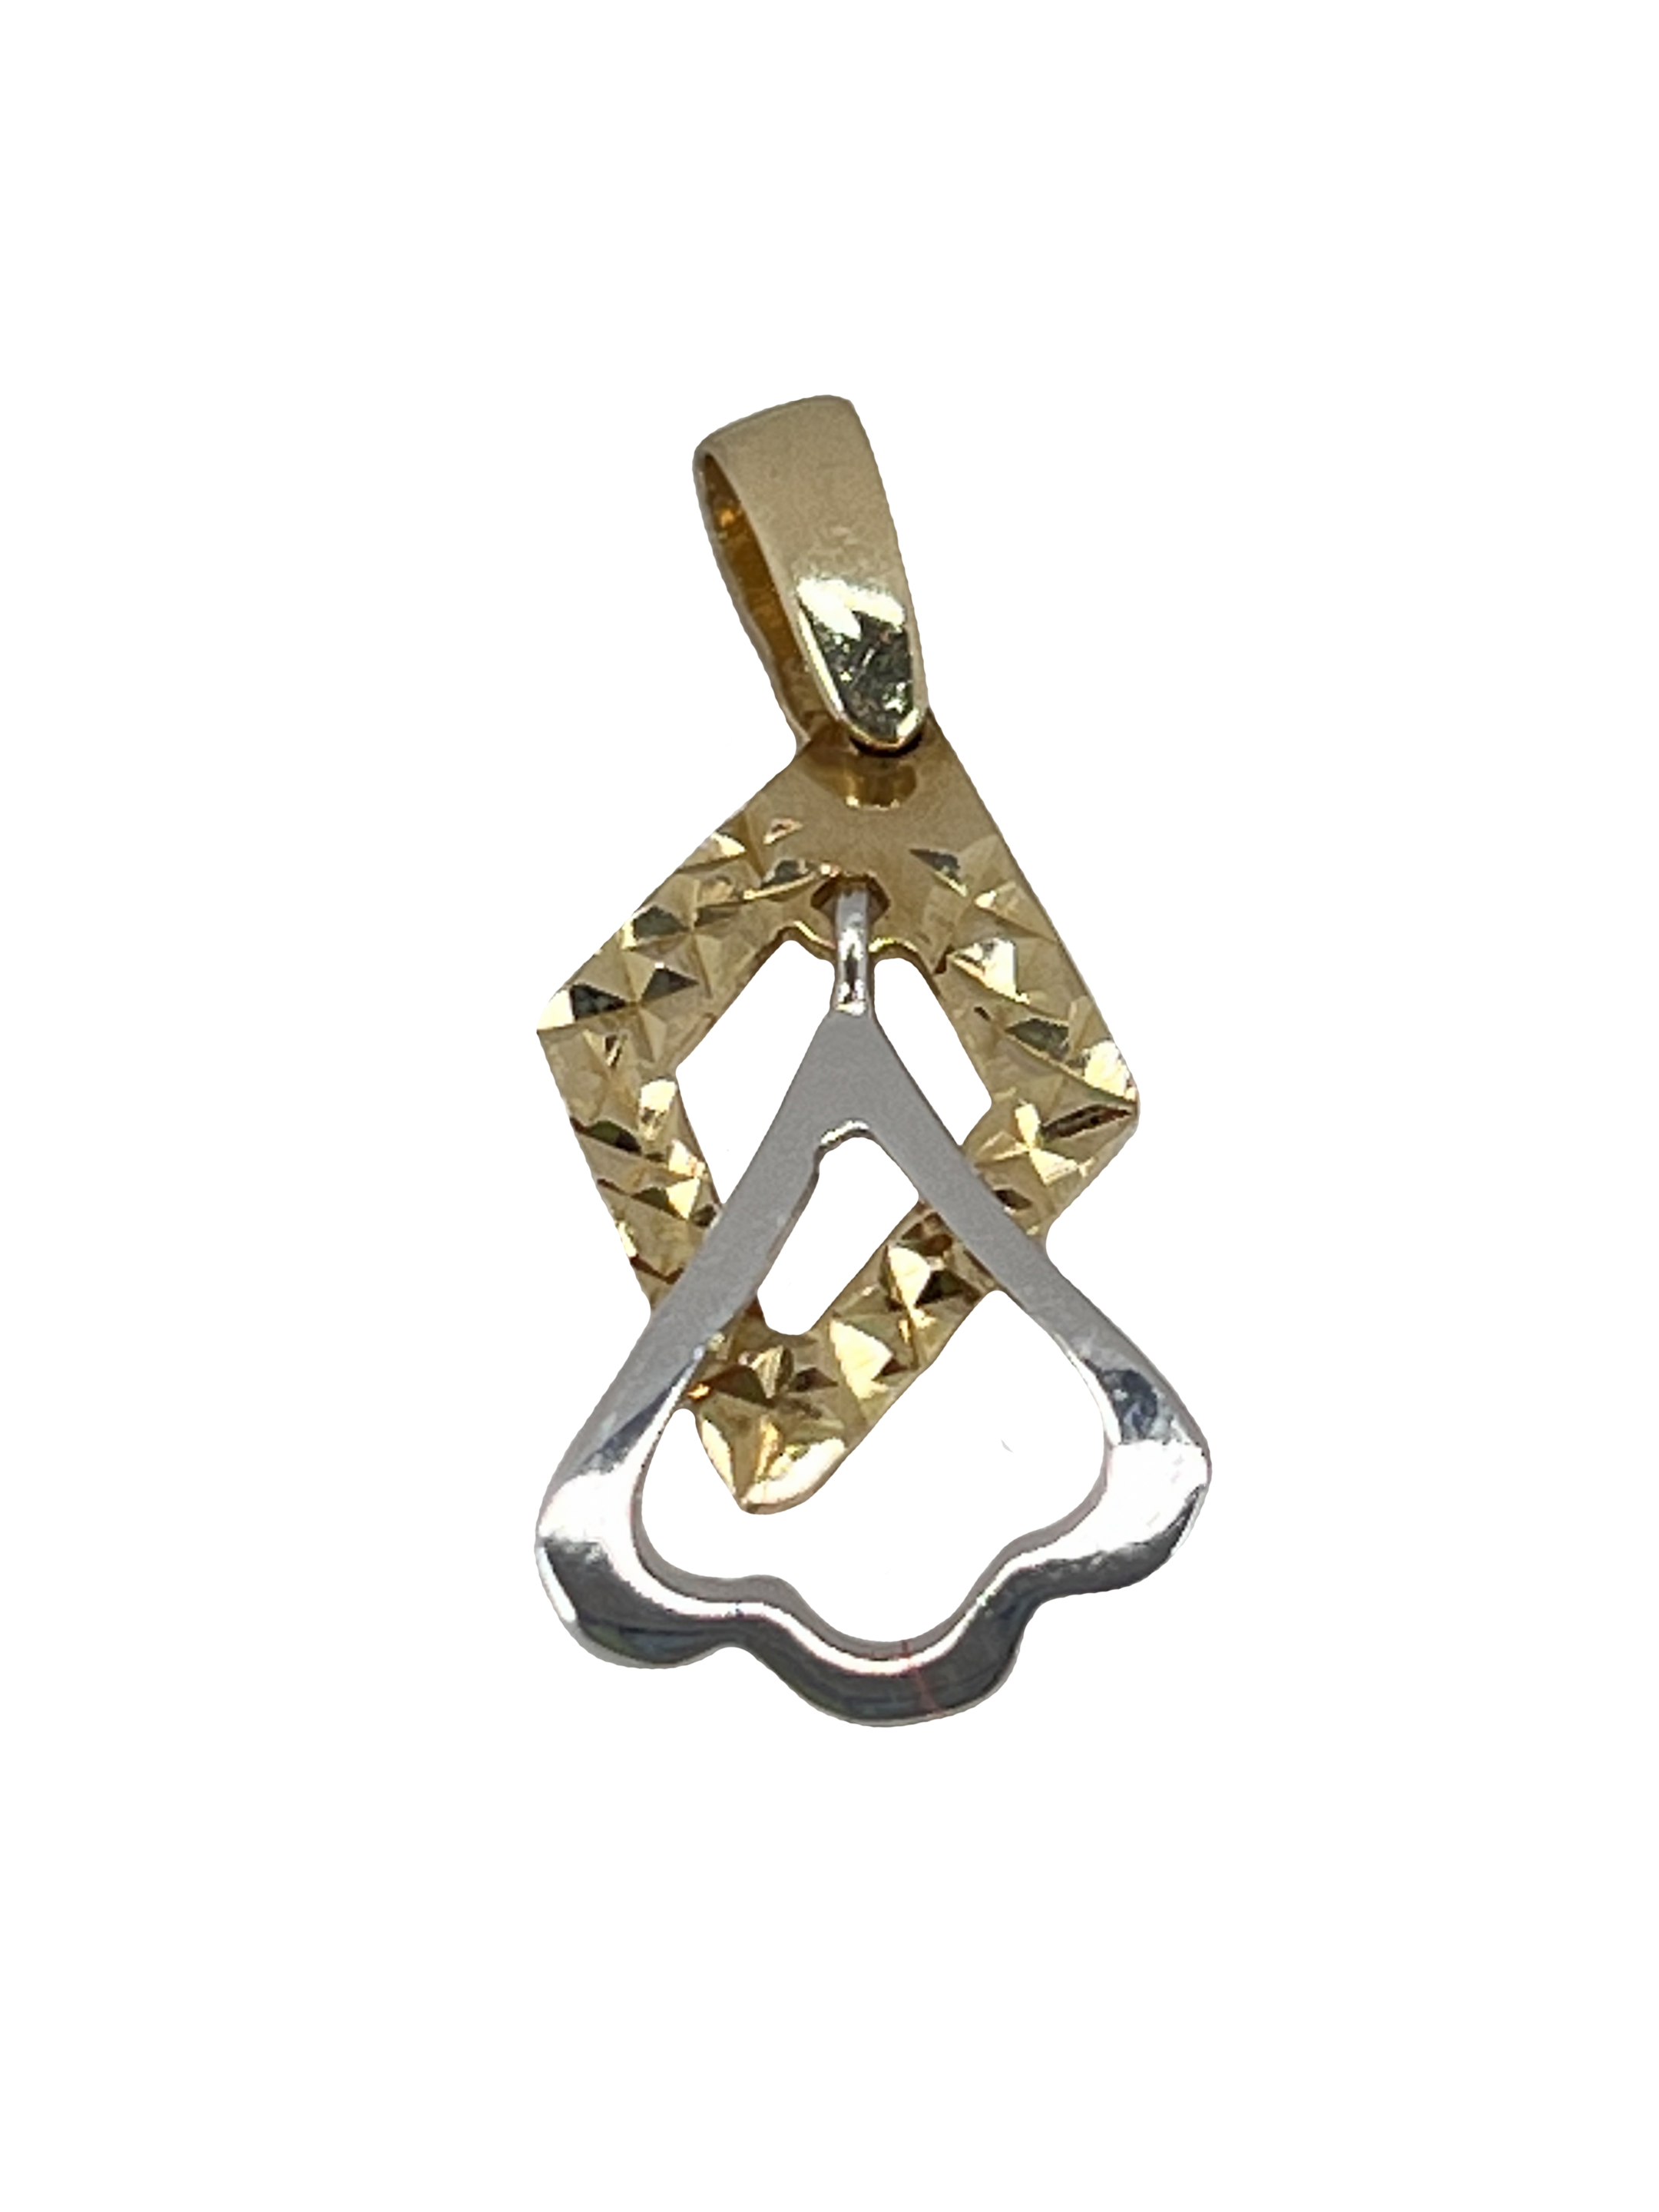 Gold pendant made of combined gold with engraving